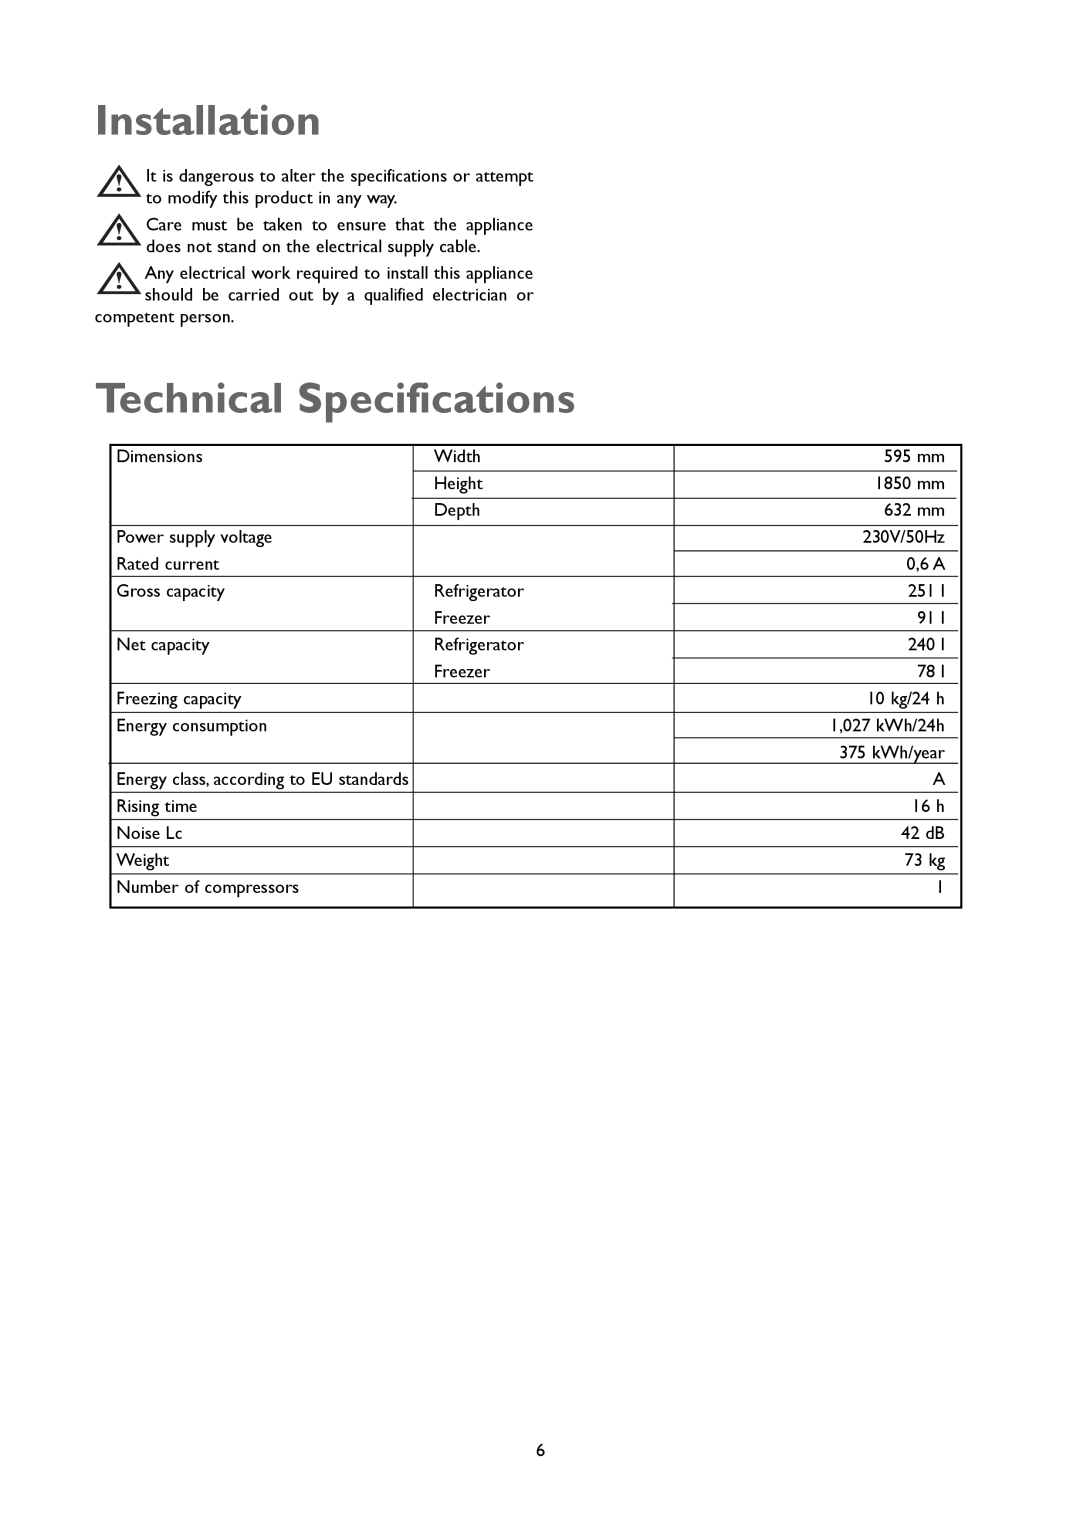 John Lewis JLSS1808, JLFFW1807 Installation, Technical Specifications, Energy class, according to EU standards 